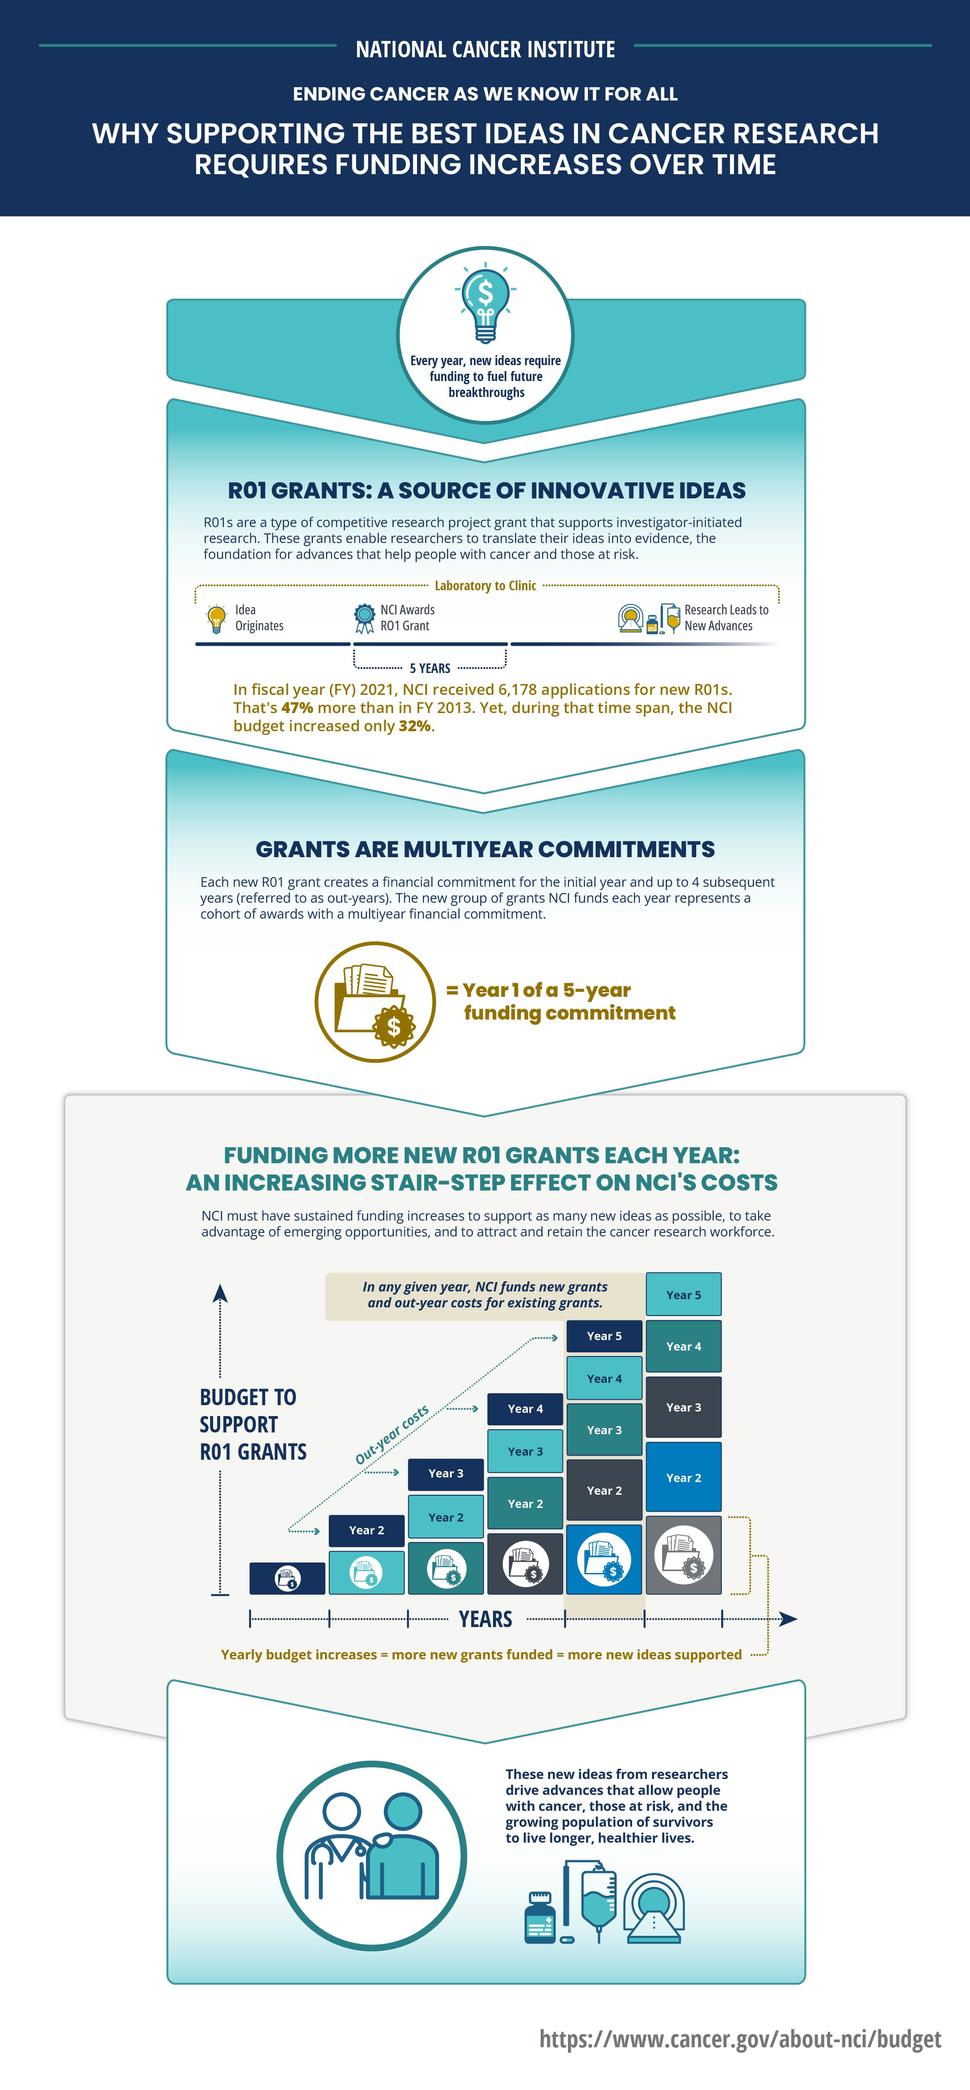 An infographic highlighting how supporting the best ideas in cancer research at the National Cancer Institute requires funding increases over time.